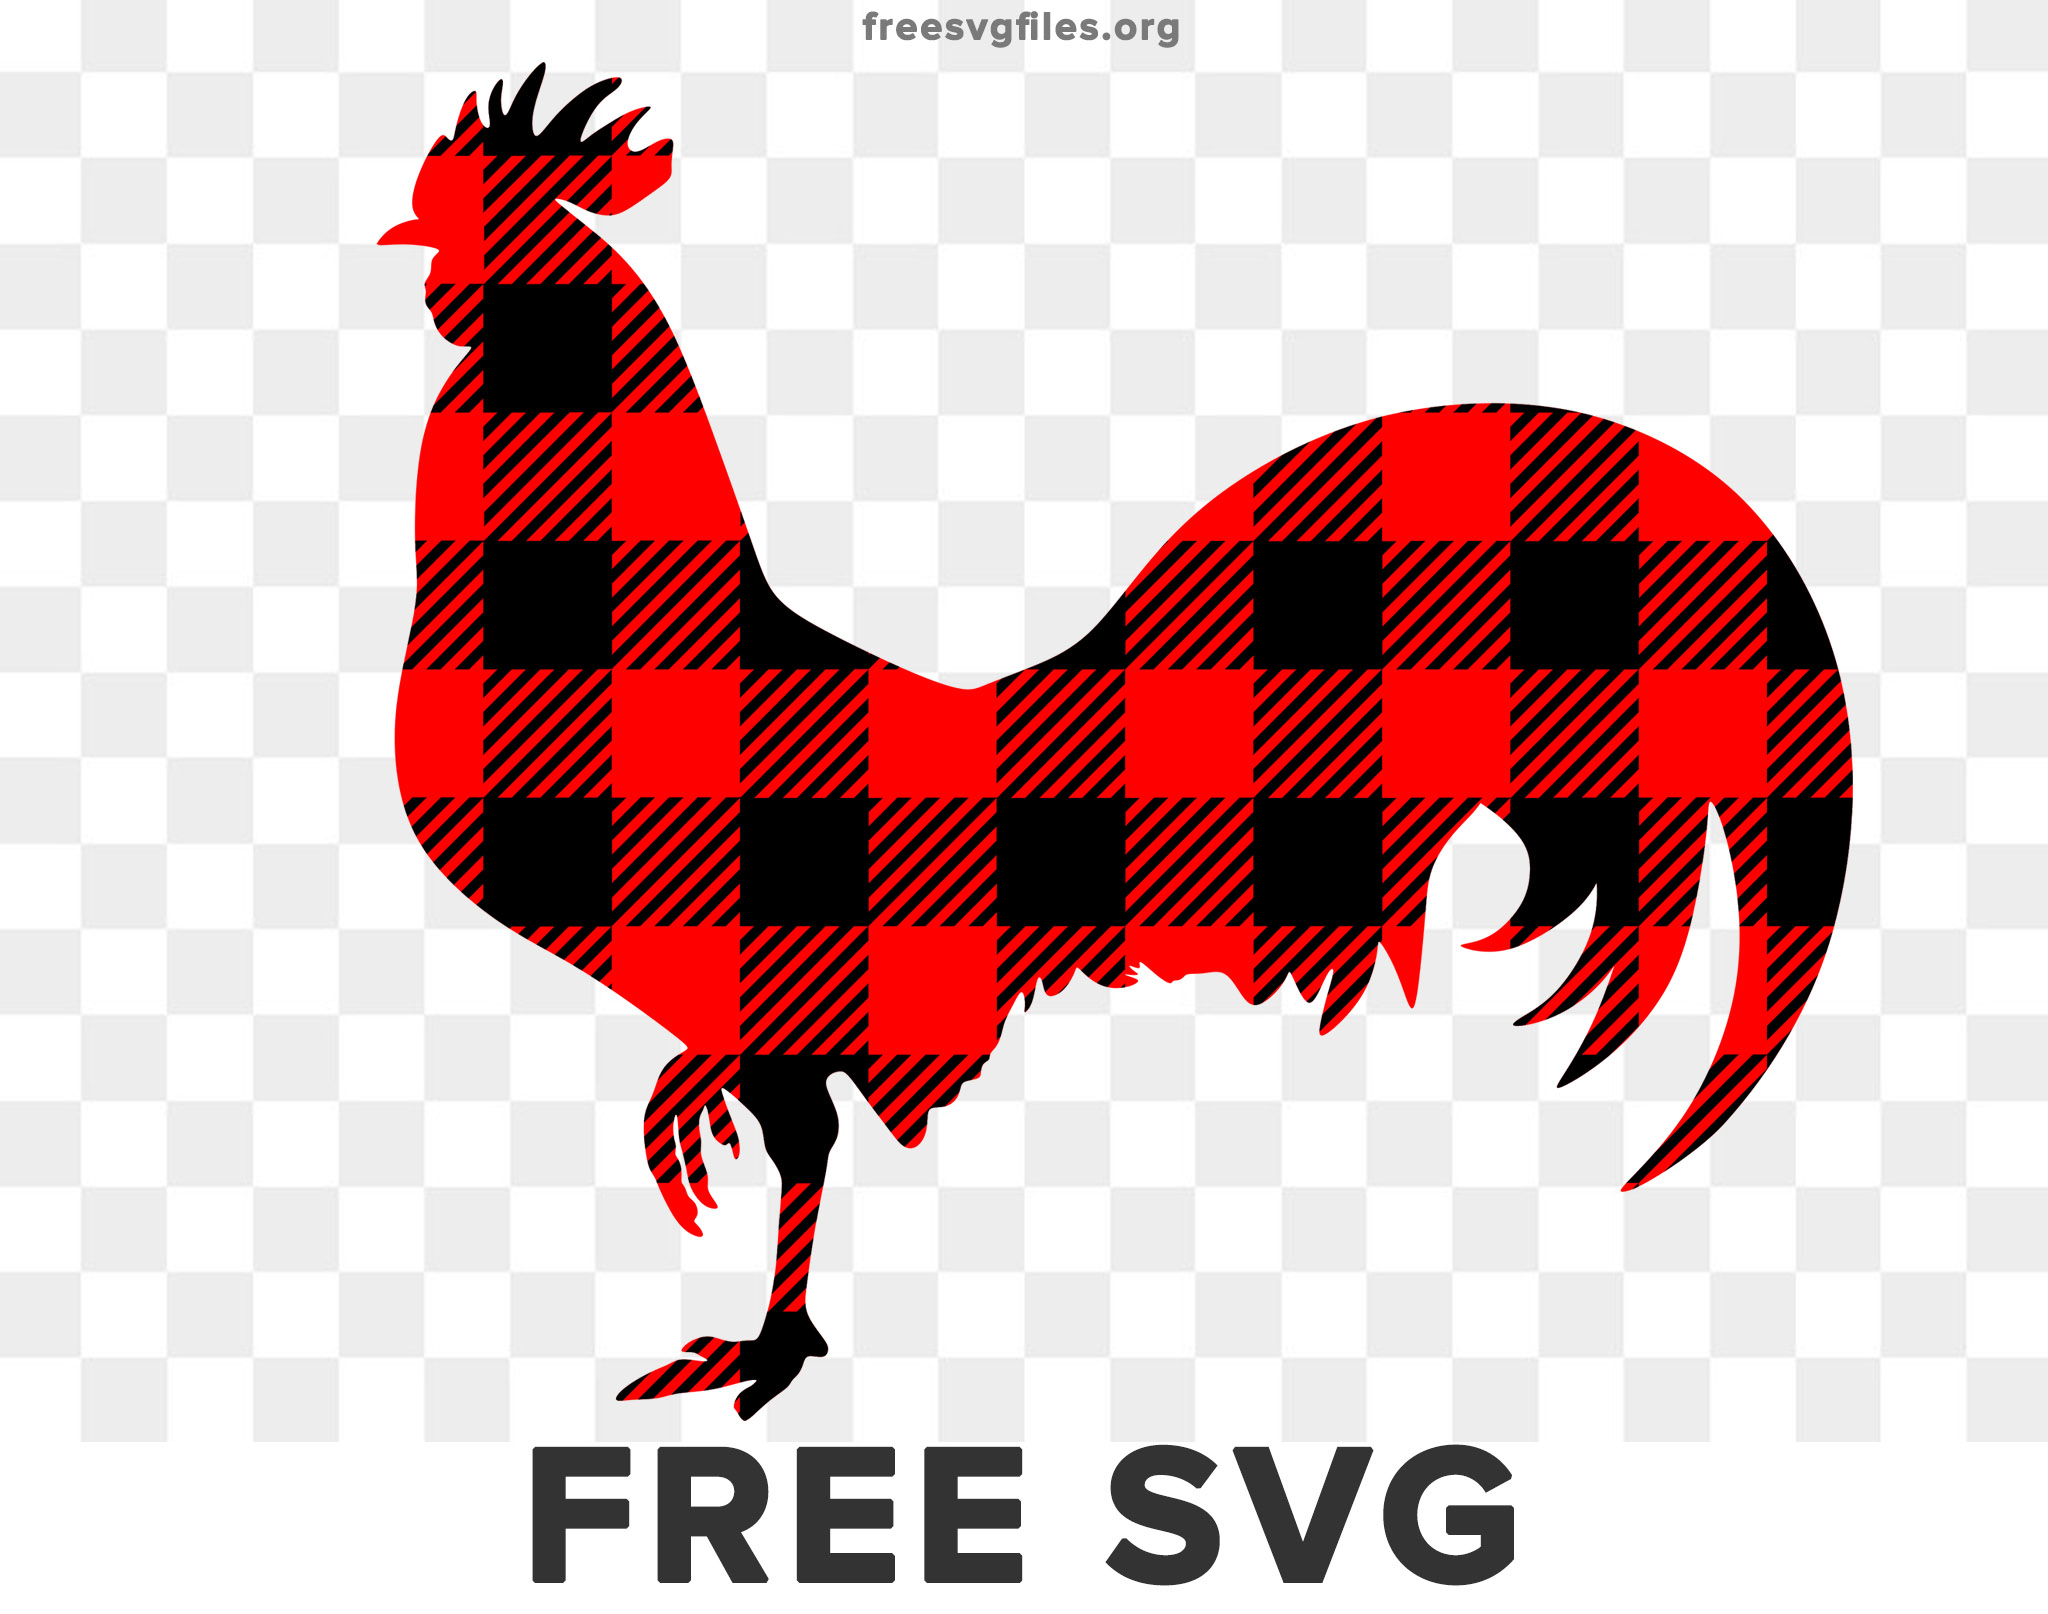 Download Free Svg Files Free Svg Designs For Private Use